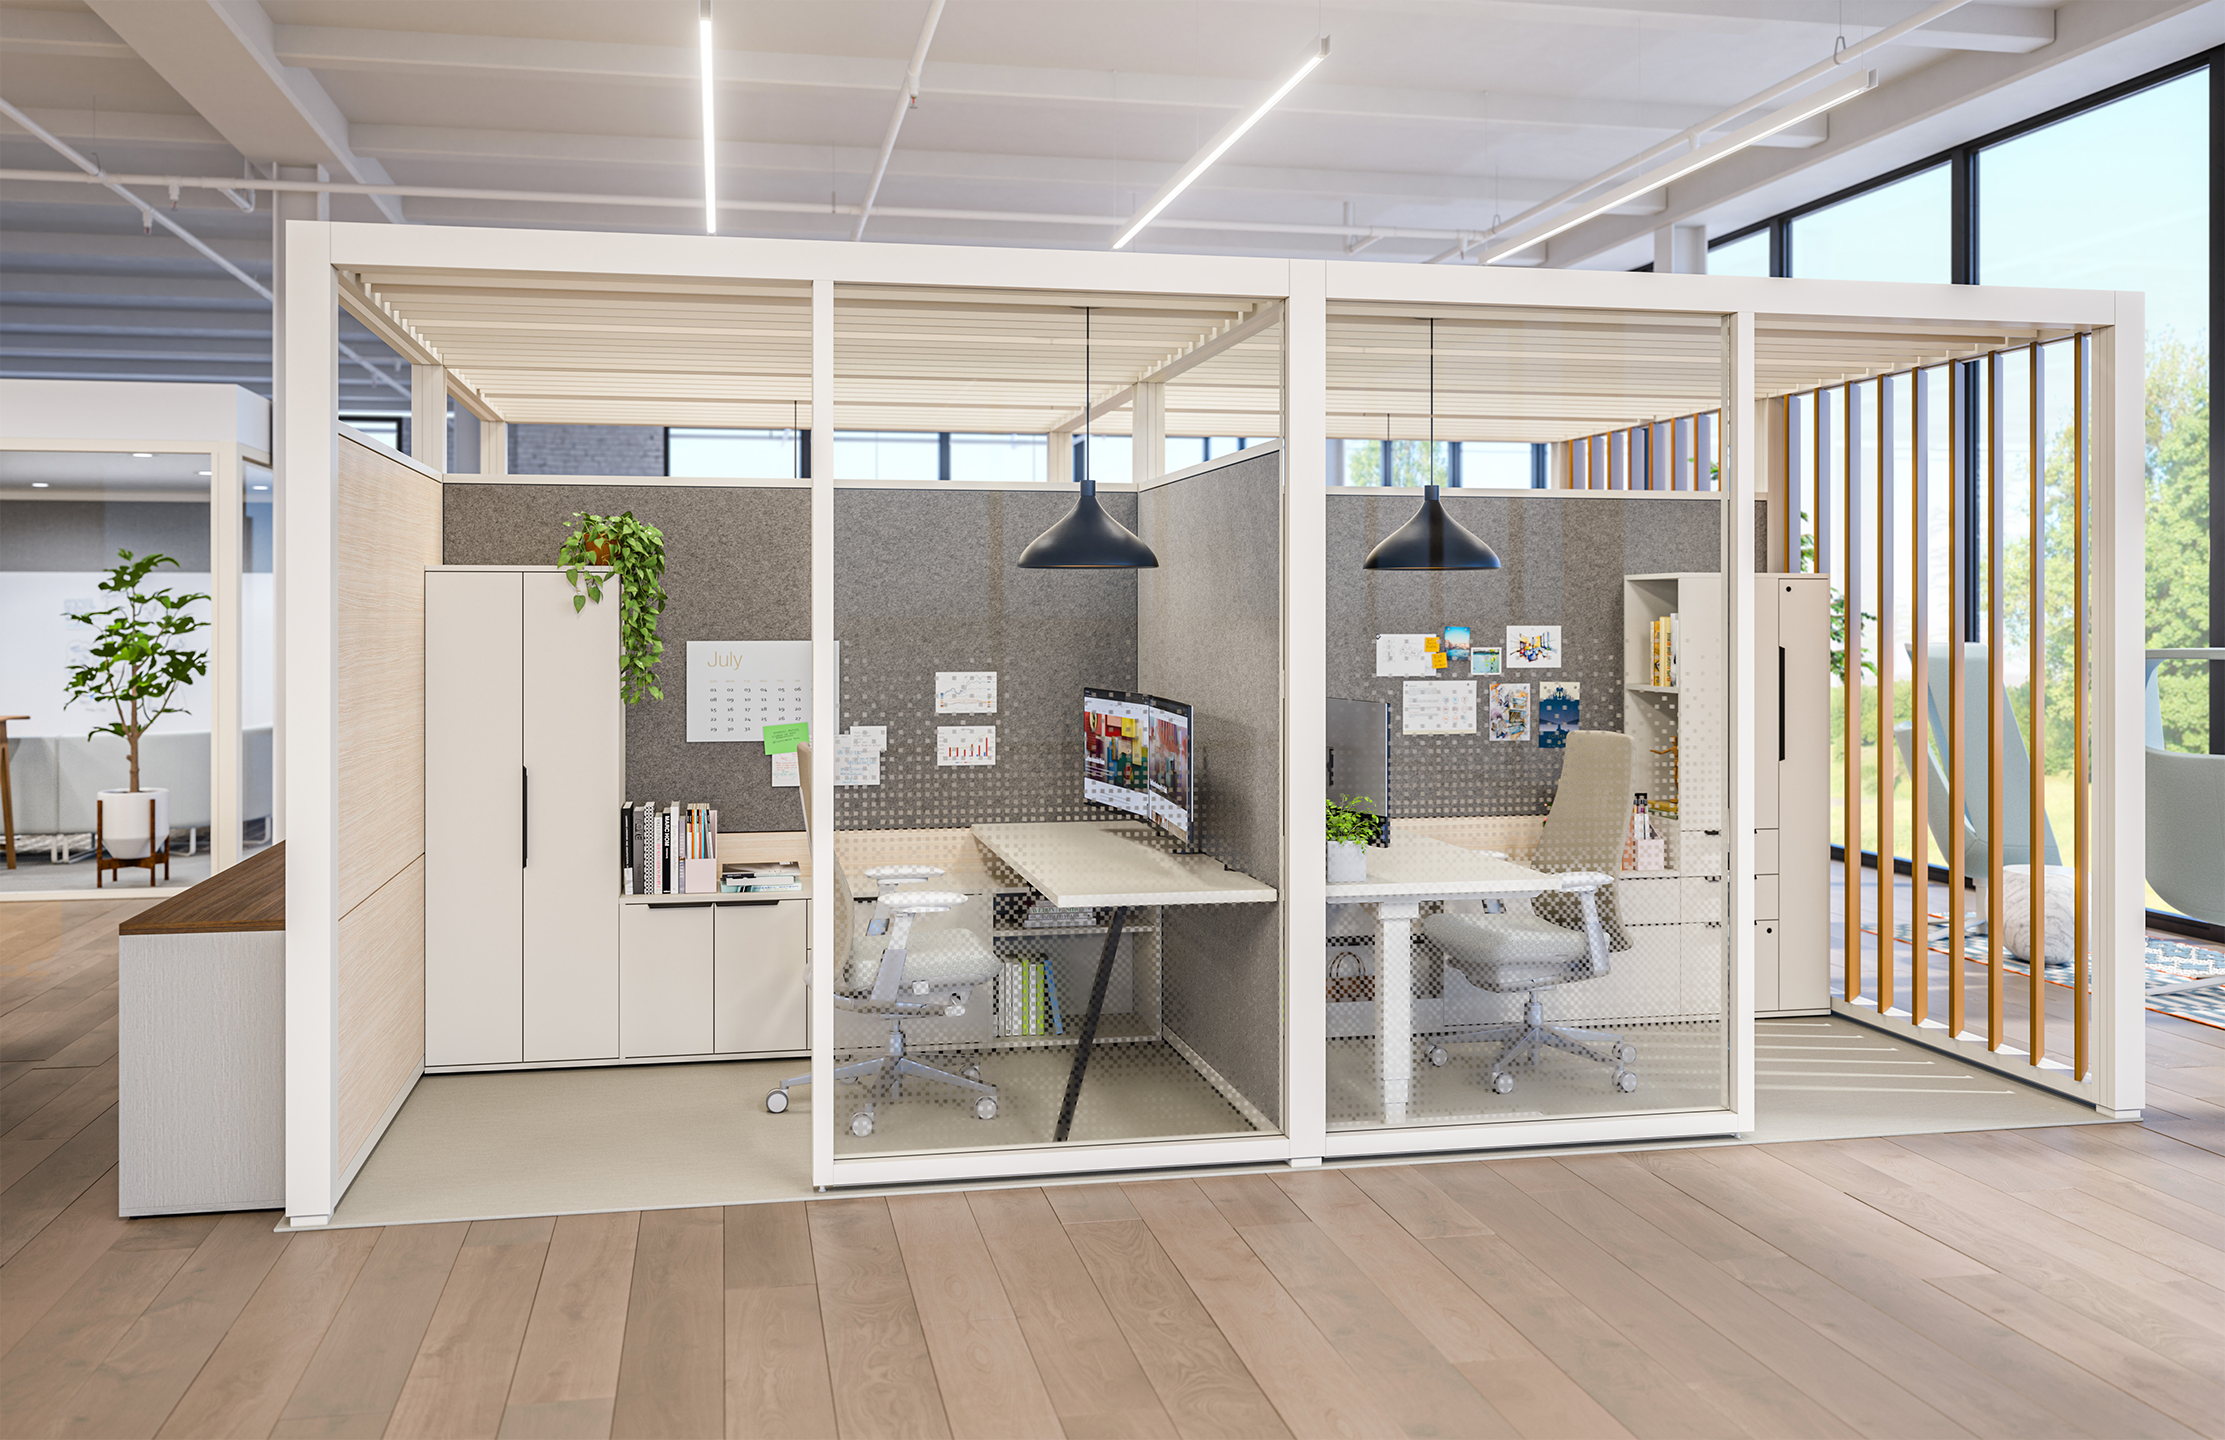 Two enclosed offices in Pergola workspaces with Be_Hold Be wardrobes and credenzas